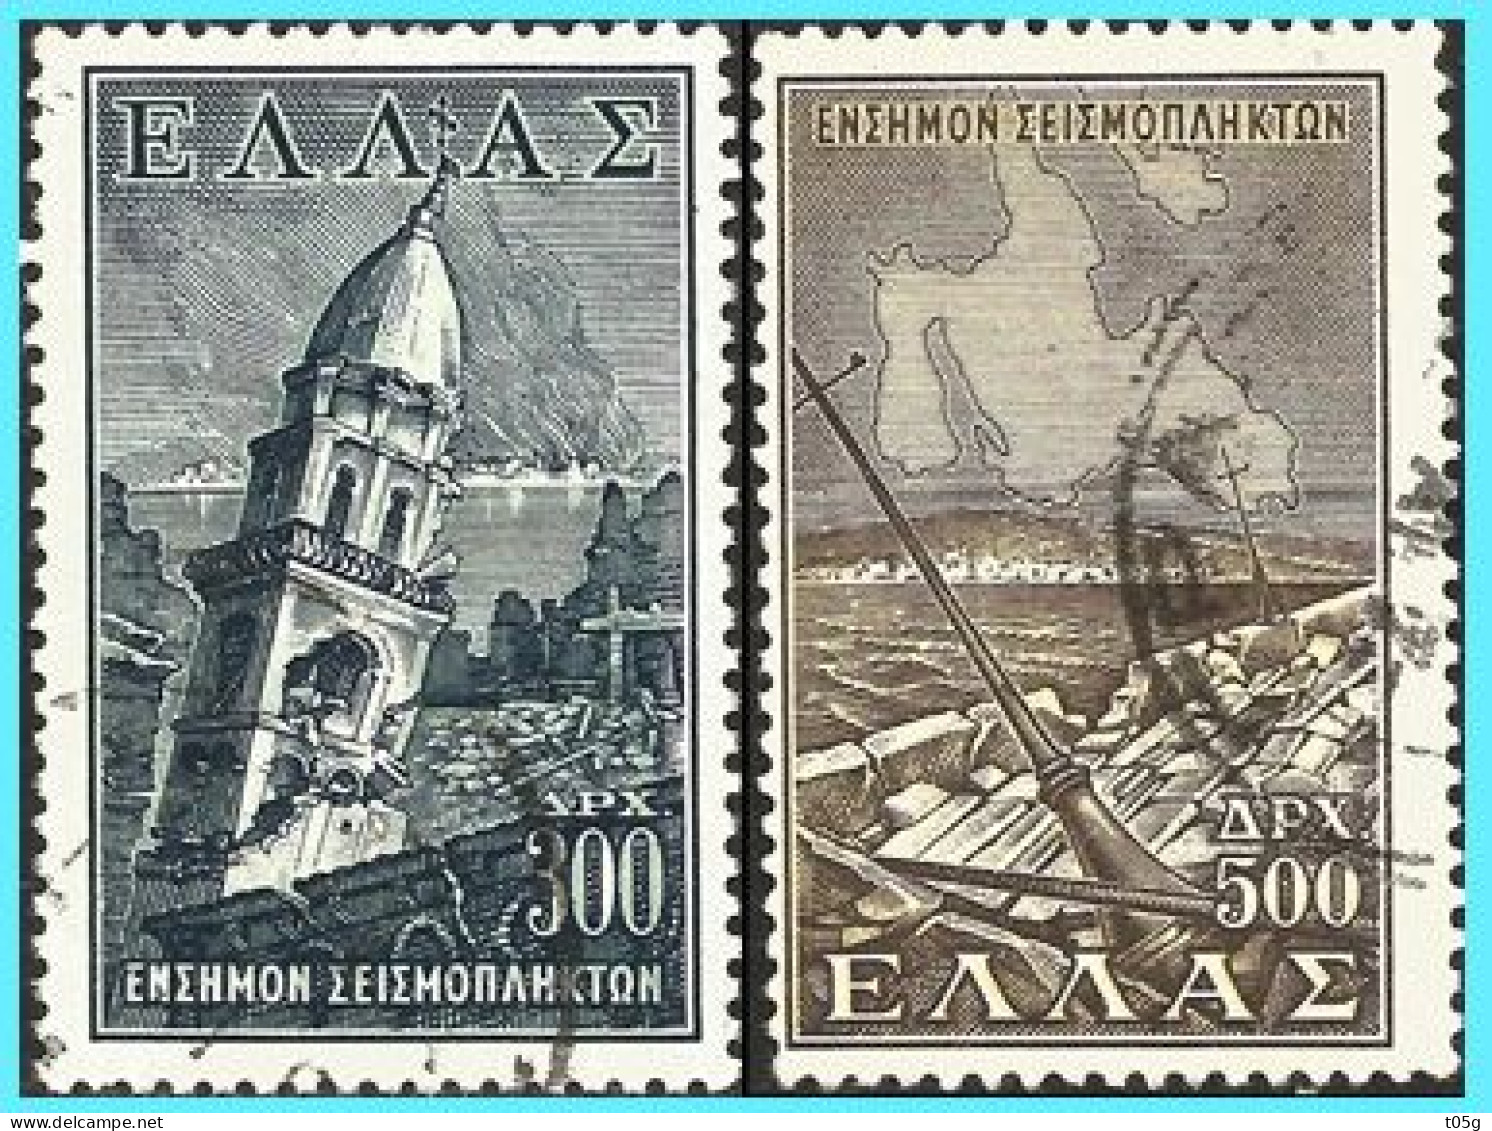 GREECE- GRECE - HELLAS 1953: " Ionian Islands Earthquake Fund Issue" Complet Set Used - Charity Issues